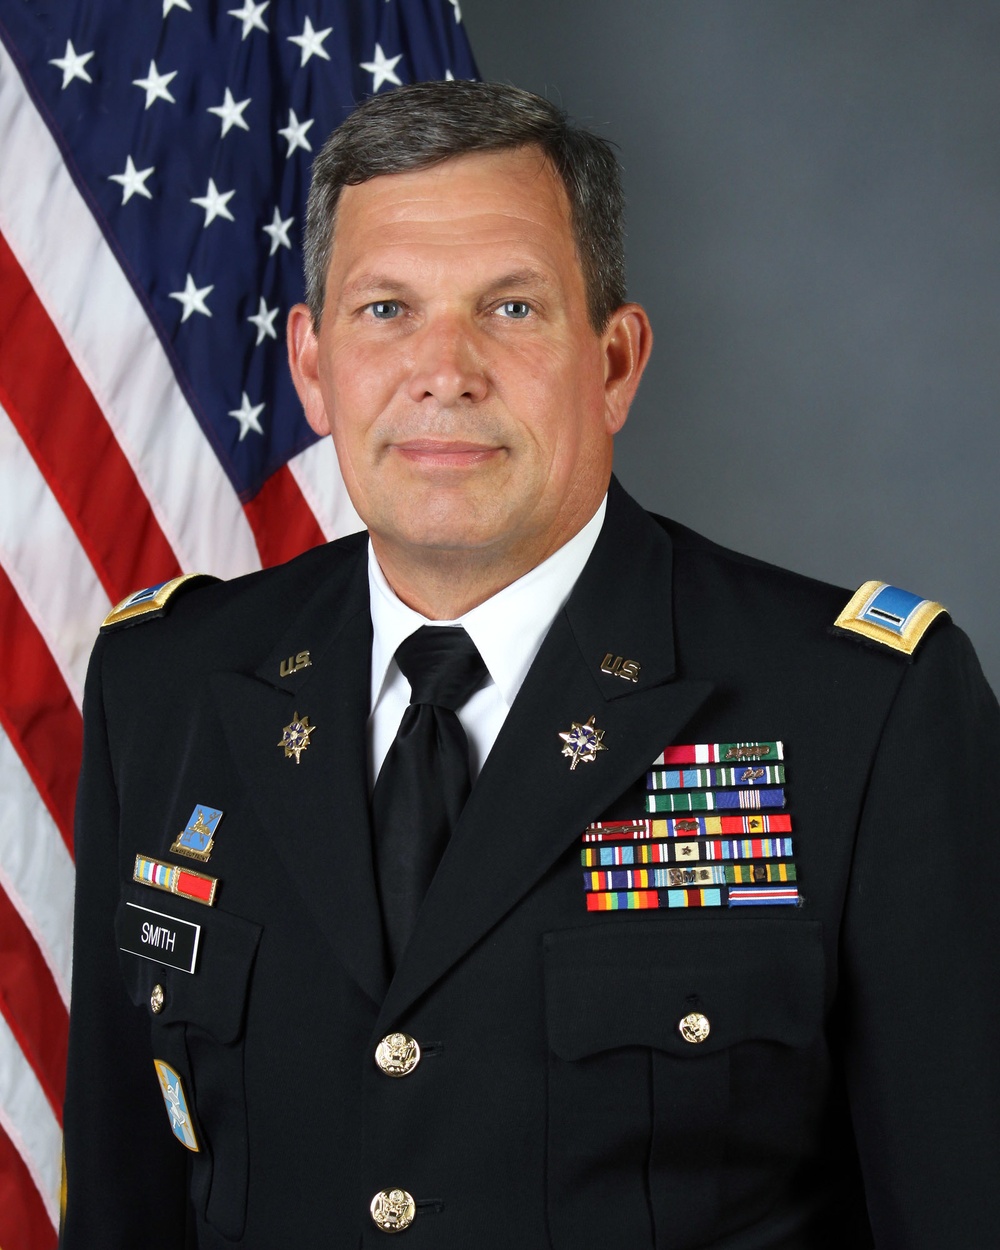 Command Chief Warrant Officer Russell Smith